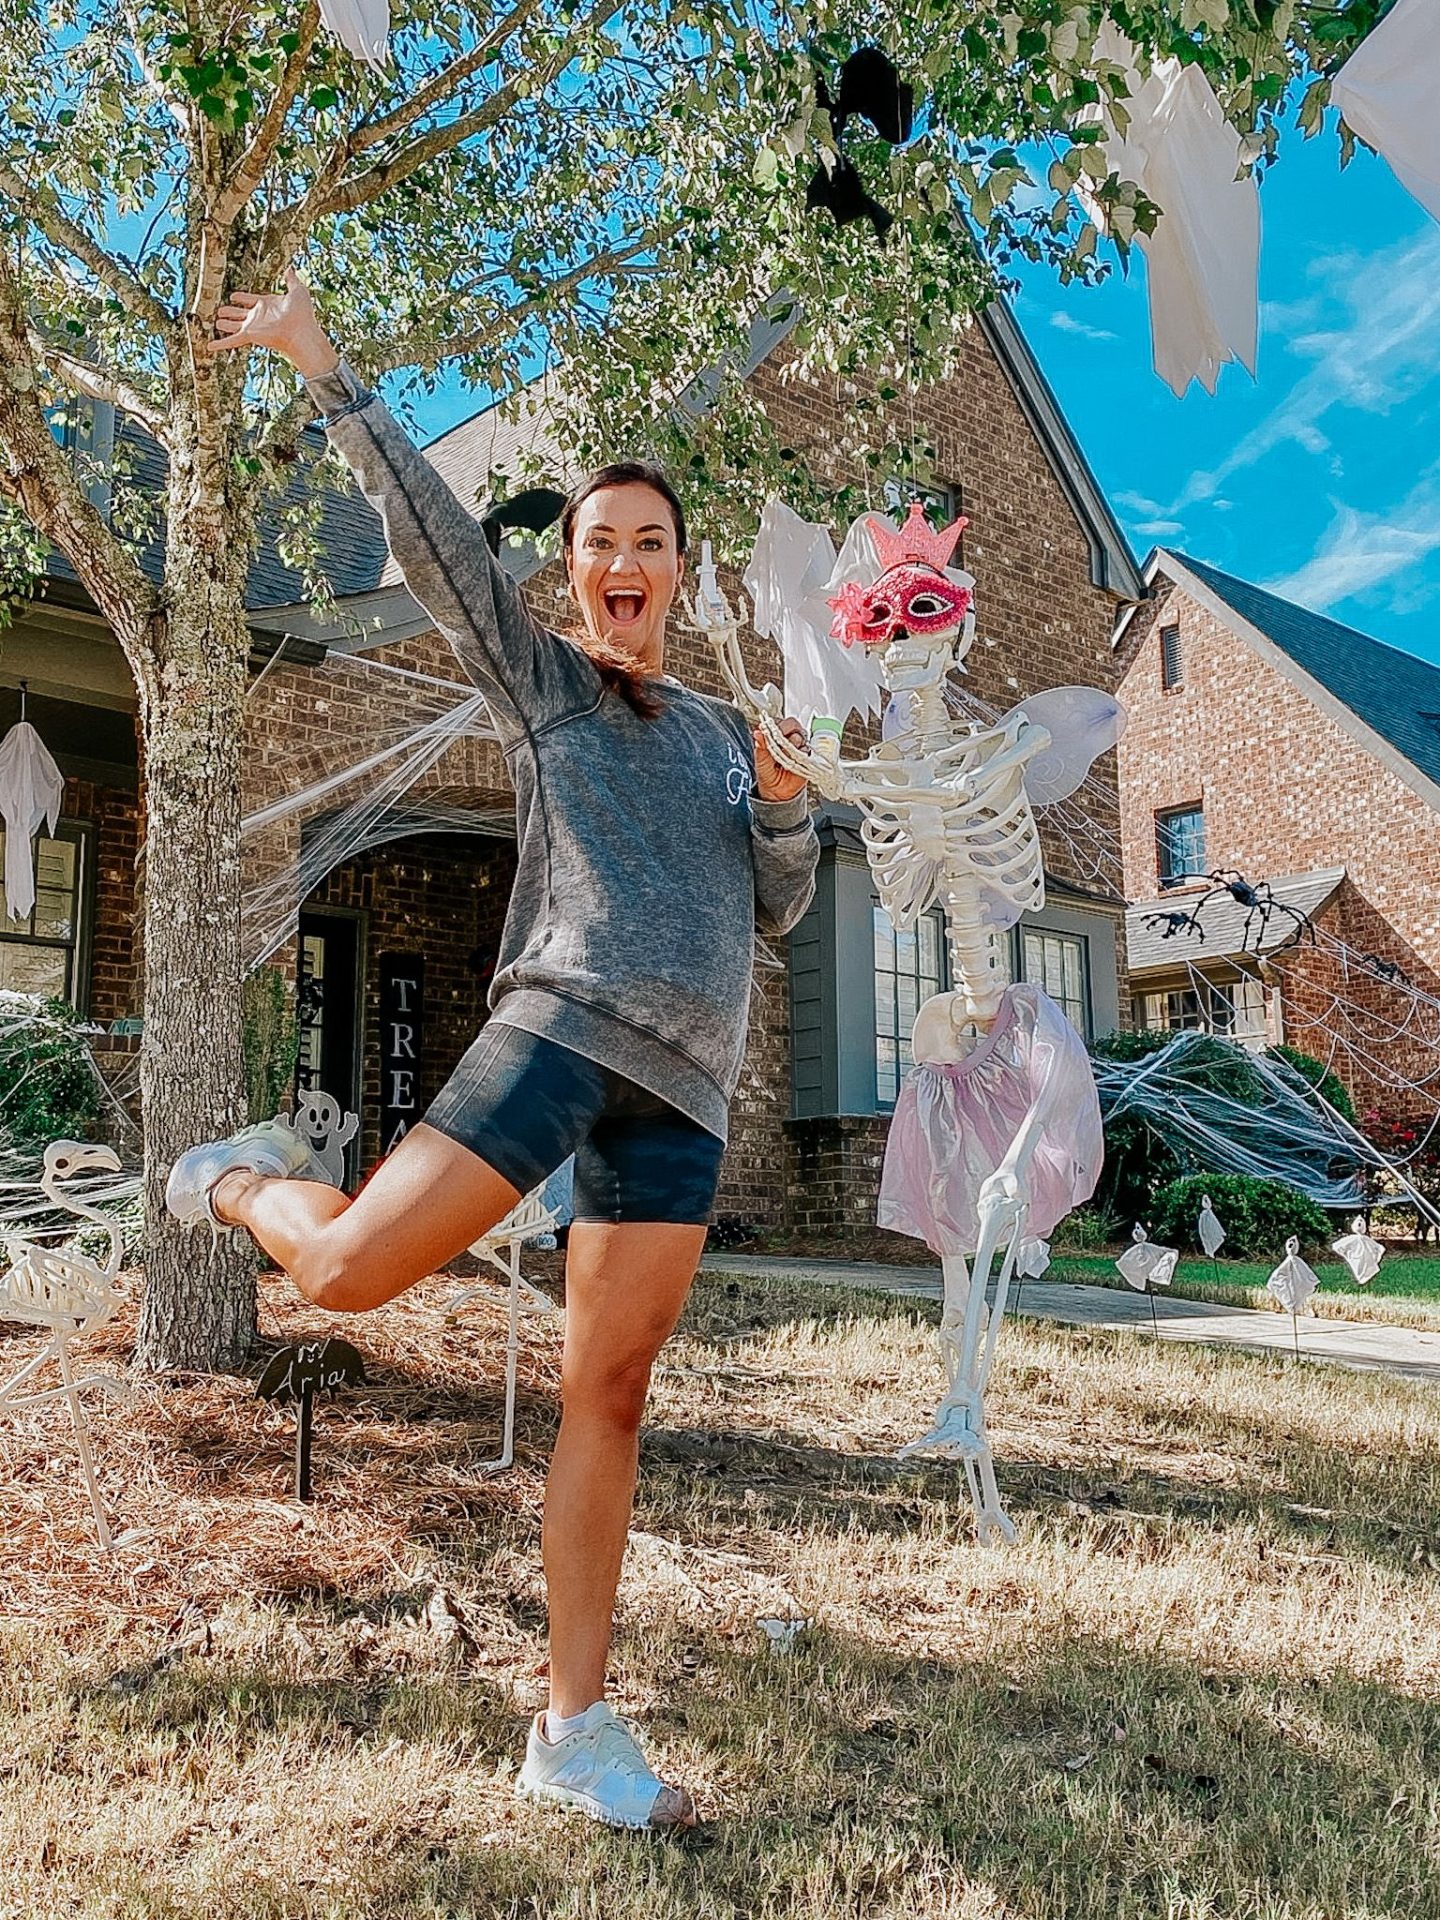 Fall Into Fitness: The Ultimate Fall Fitness Challenge For The Busy Mom On The Go by Alabama Health + Fitness blogger, My Life Well Loved.